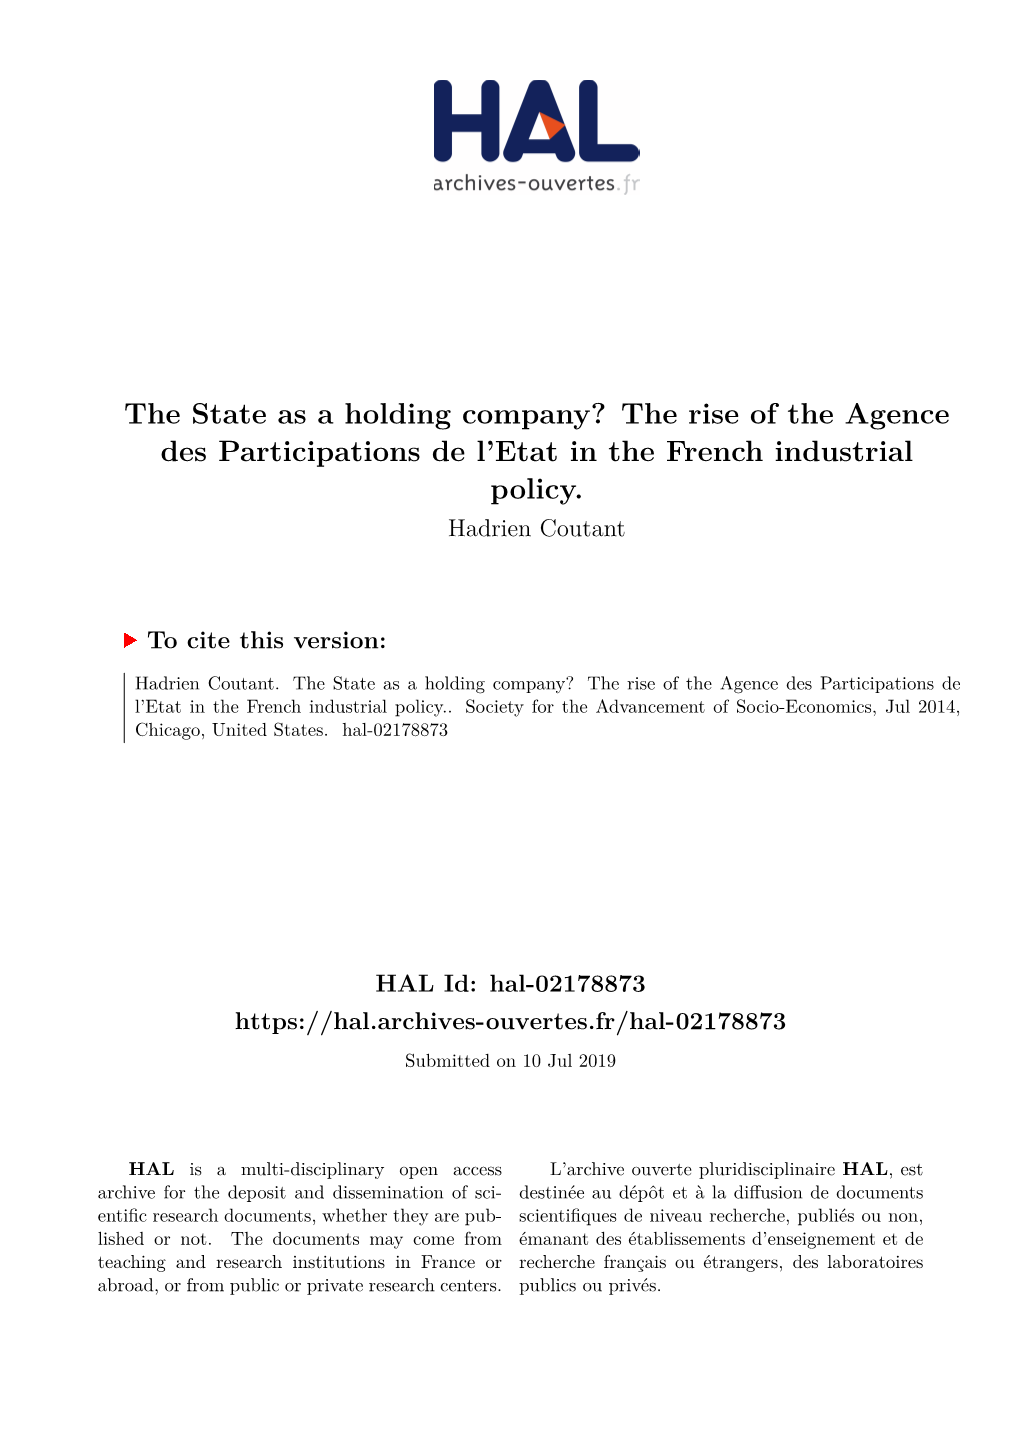 The State As a Holding Company? the Rise of the Agence Des Participations De L'etat in the French Industrial Policy